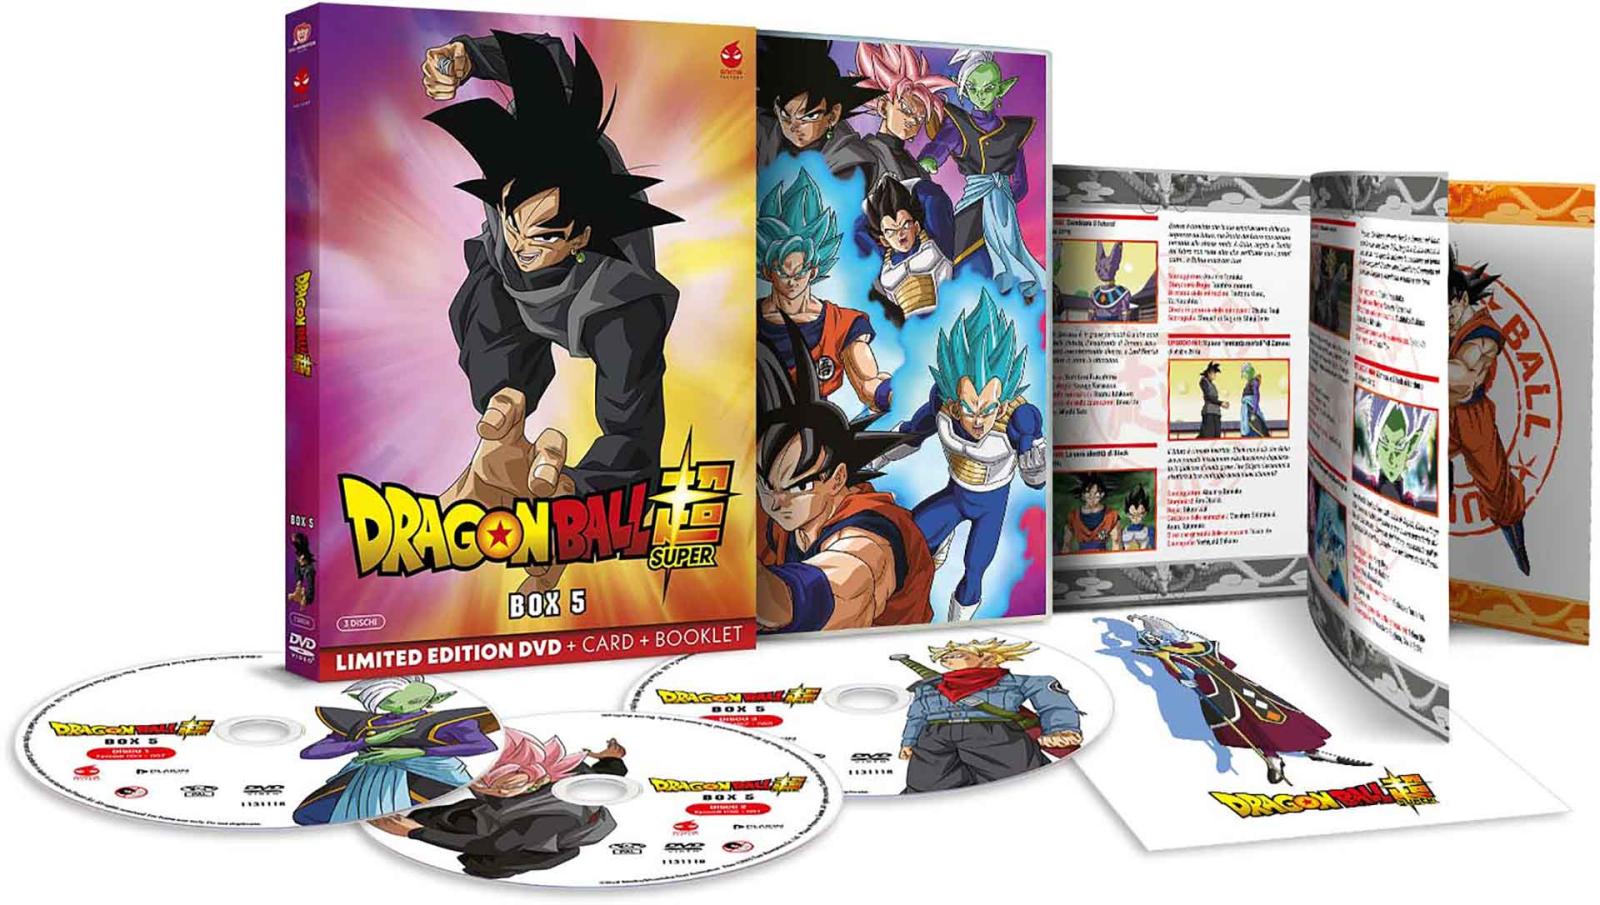 Dragon Ball Super - Volume 5 - Limited Edition 3 DVD + Card + Booklet (DVD) Image 2